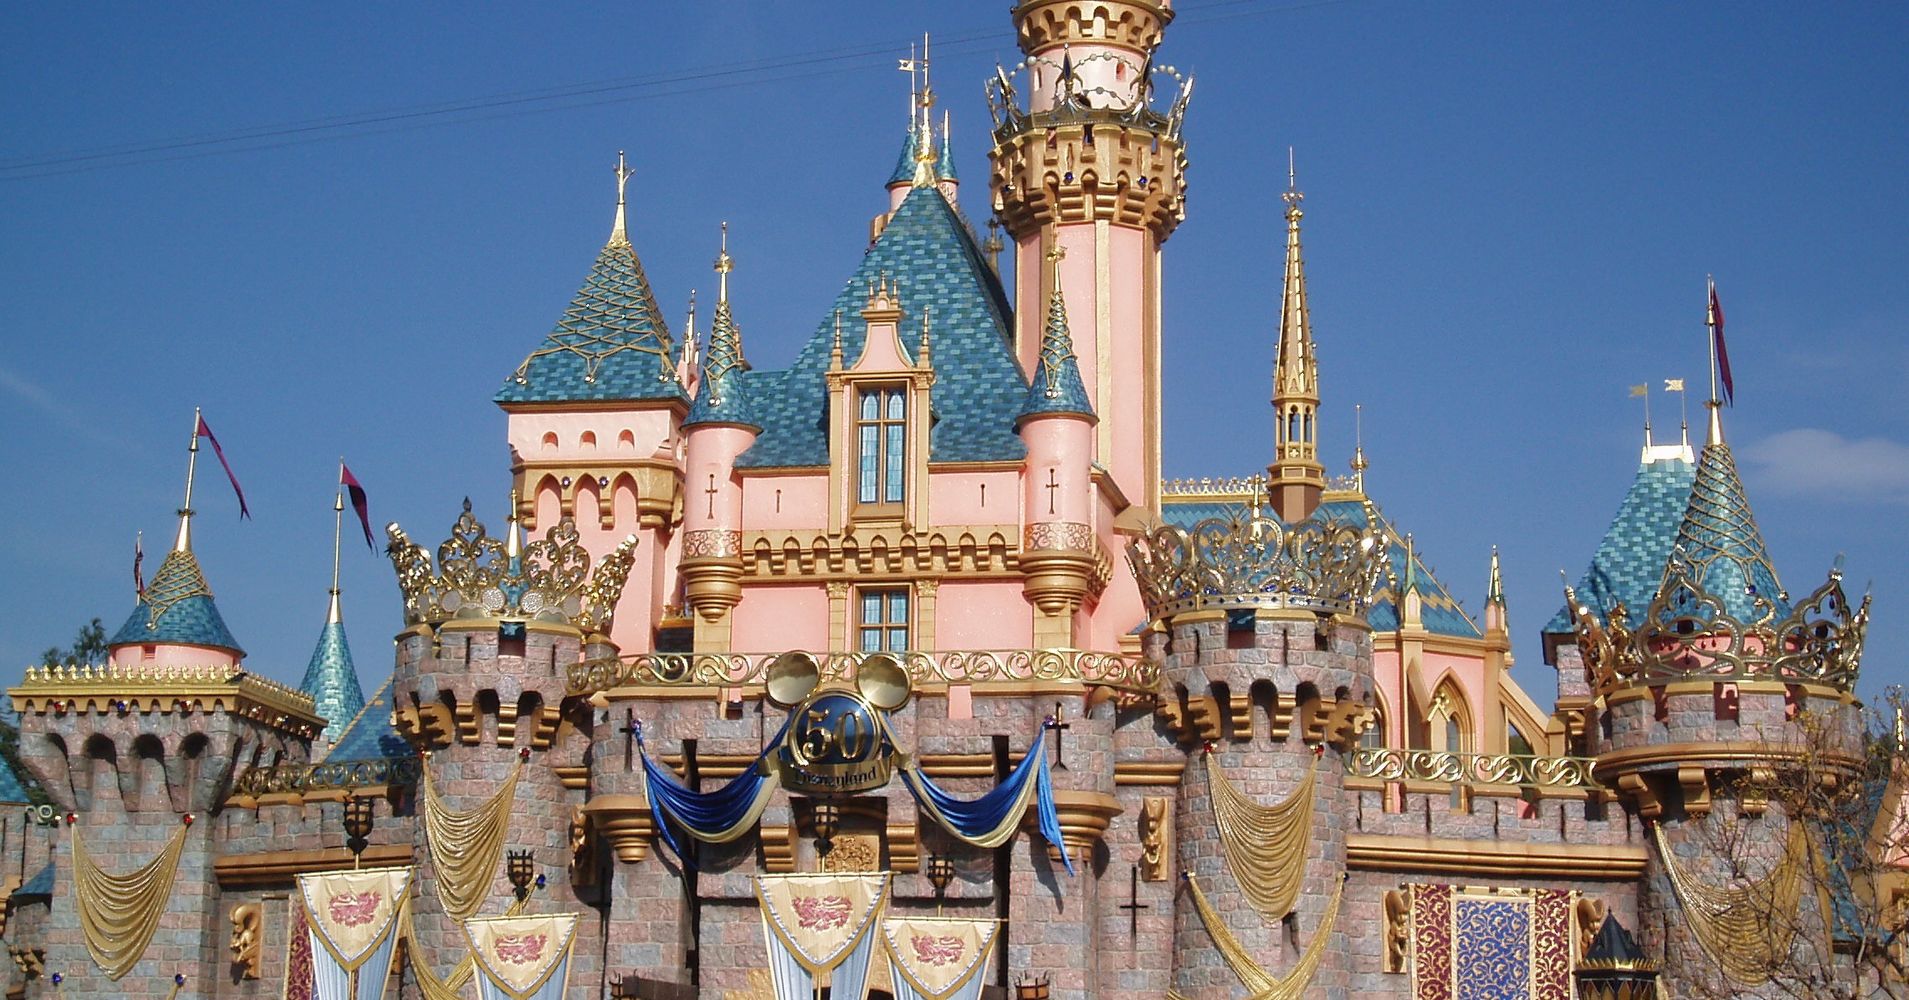 Disneyland Annual Pass Jumps To More Than 1,000 HuffPost